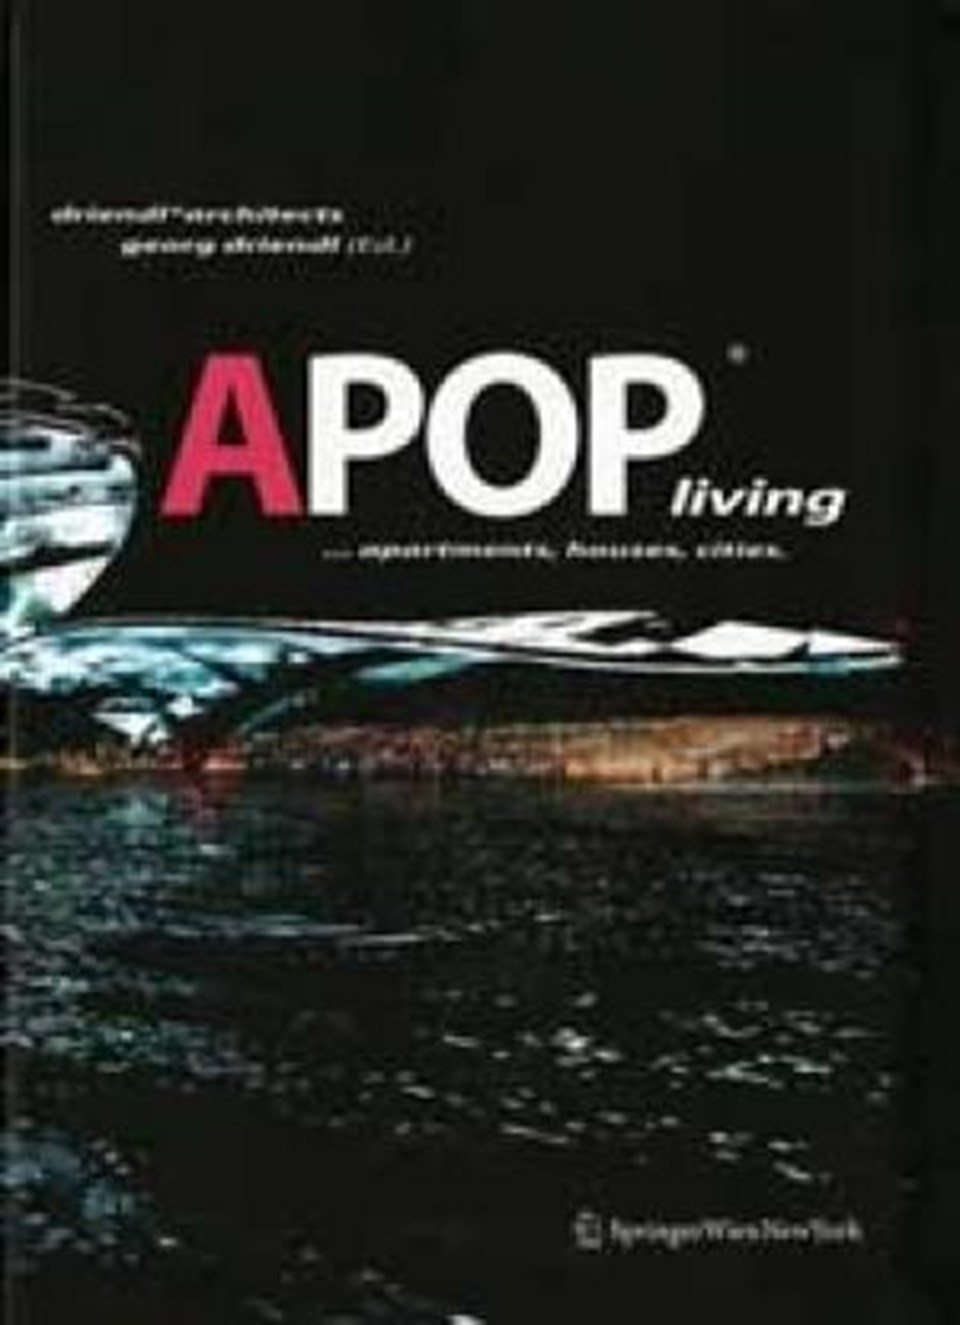 APOPliving - apartments, houses, cities